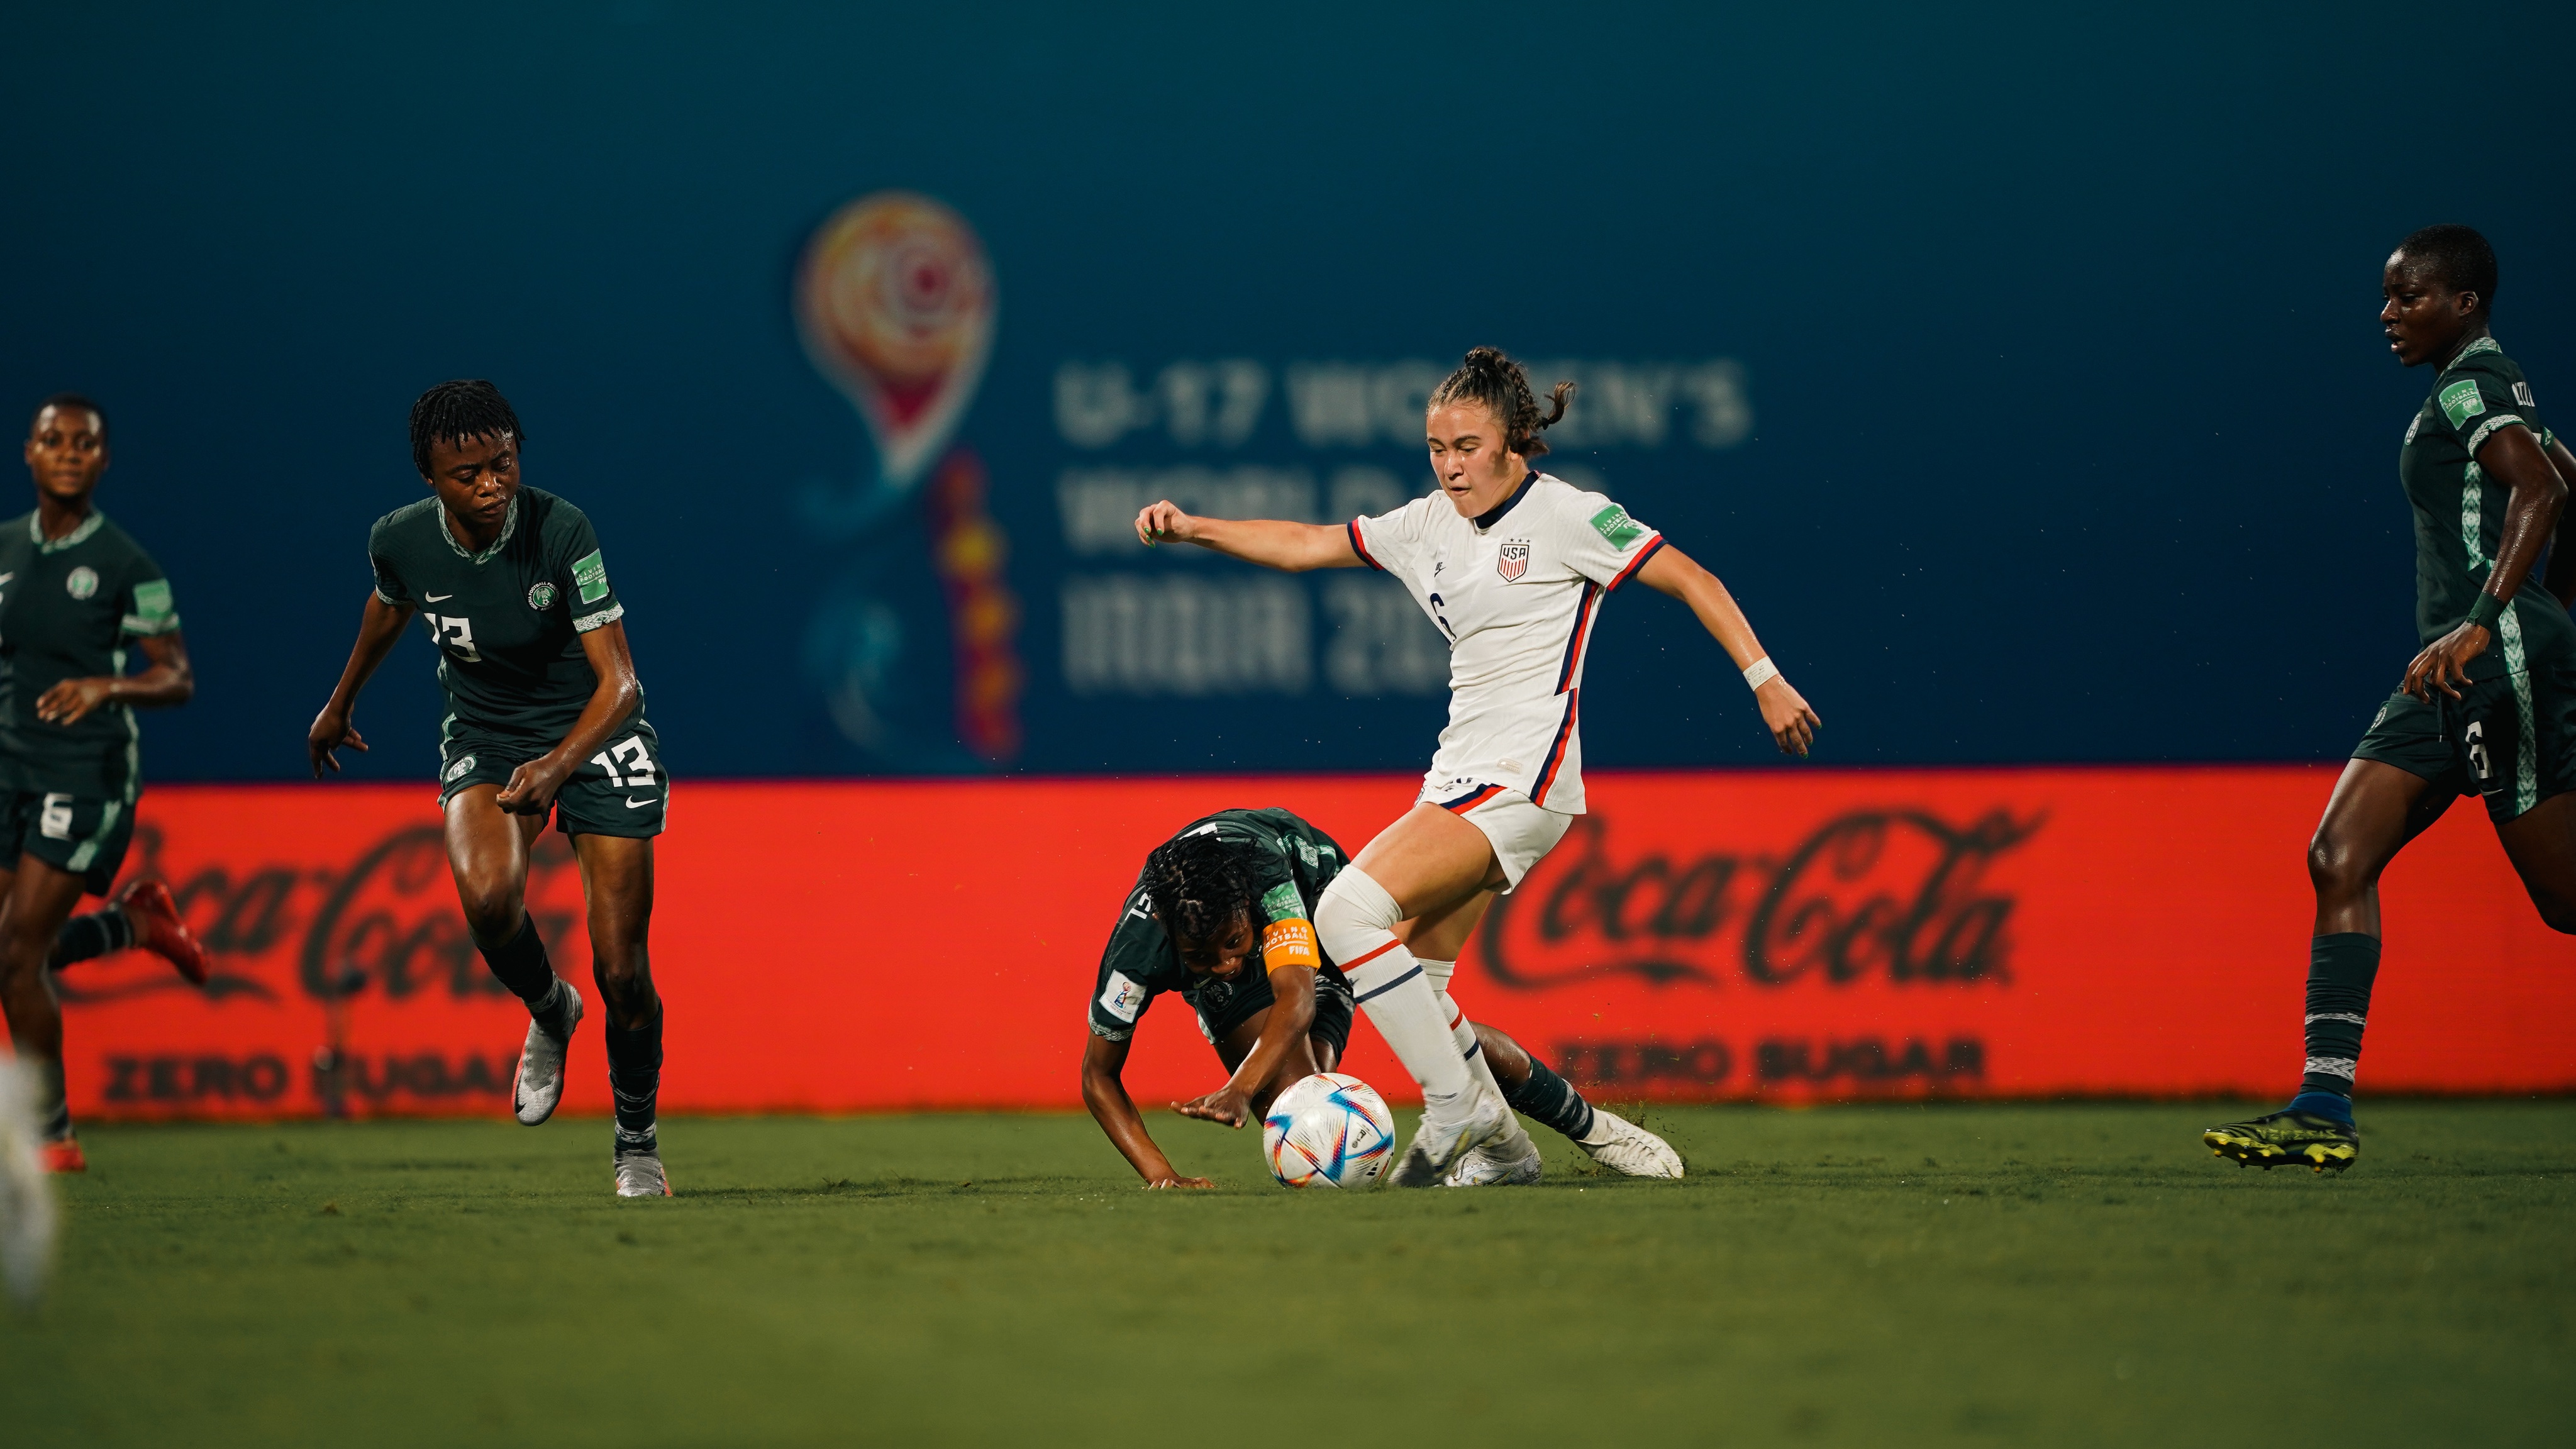 US U17 WNT World Cup Run Comes to an End